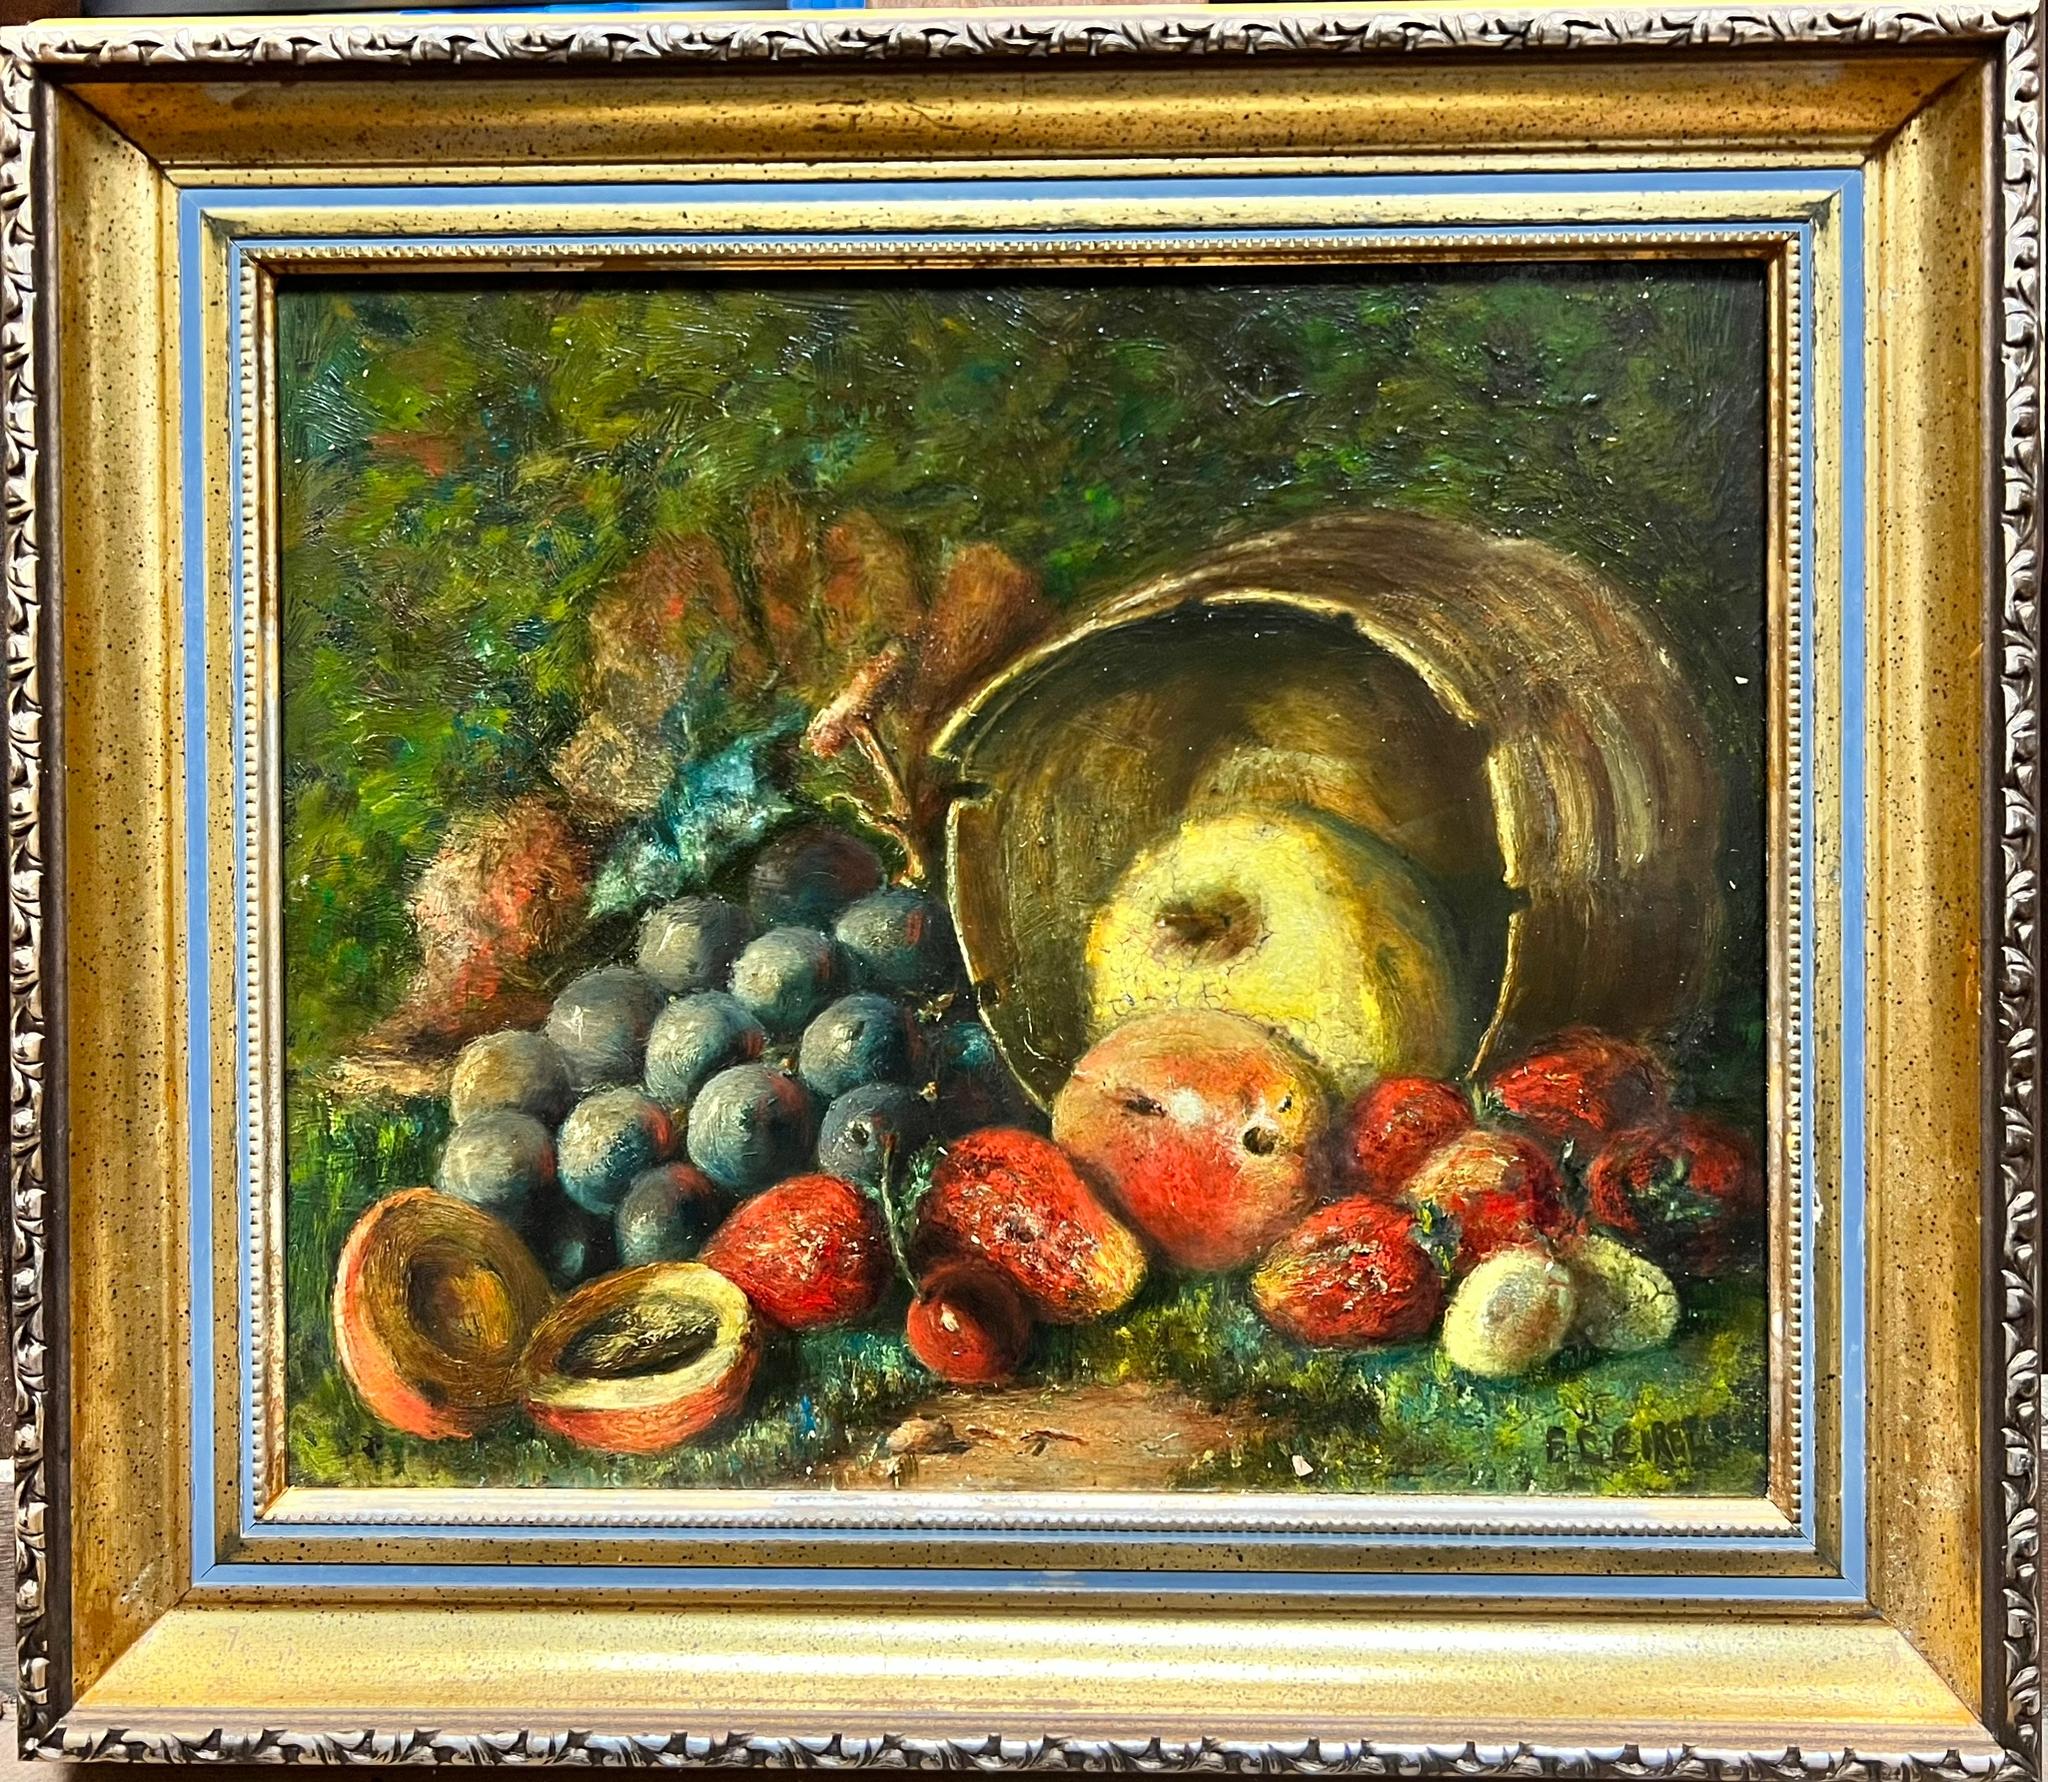 Fruit Still Life
Attributed to Ferdinand Cirel (Welsh 1884 - 1968)
signed bottom right
oil on board, framed
framed: 14 x 15 inches
painting: 10 x 12 inches
provenance: from a collection in the South West of England
The painting is in good and